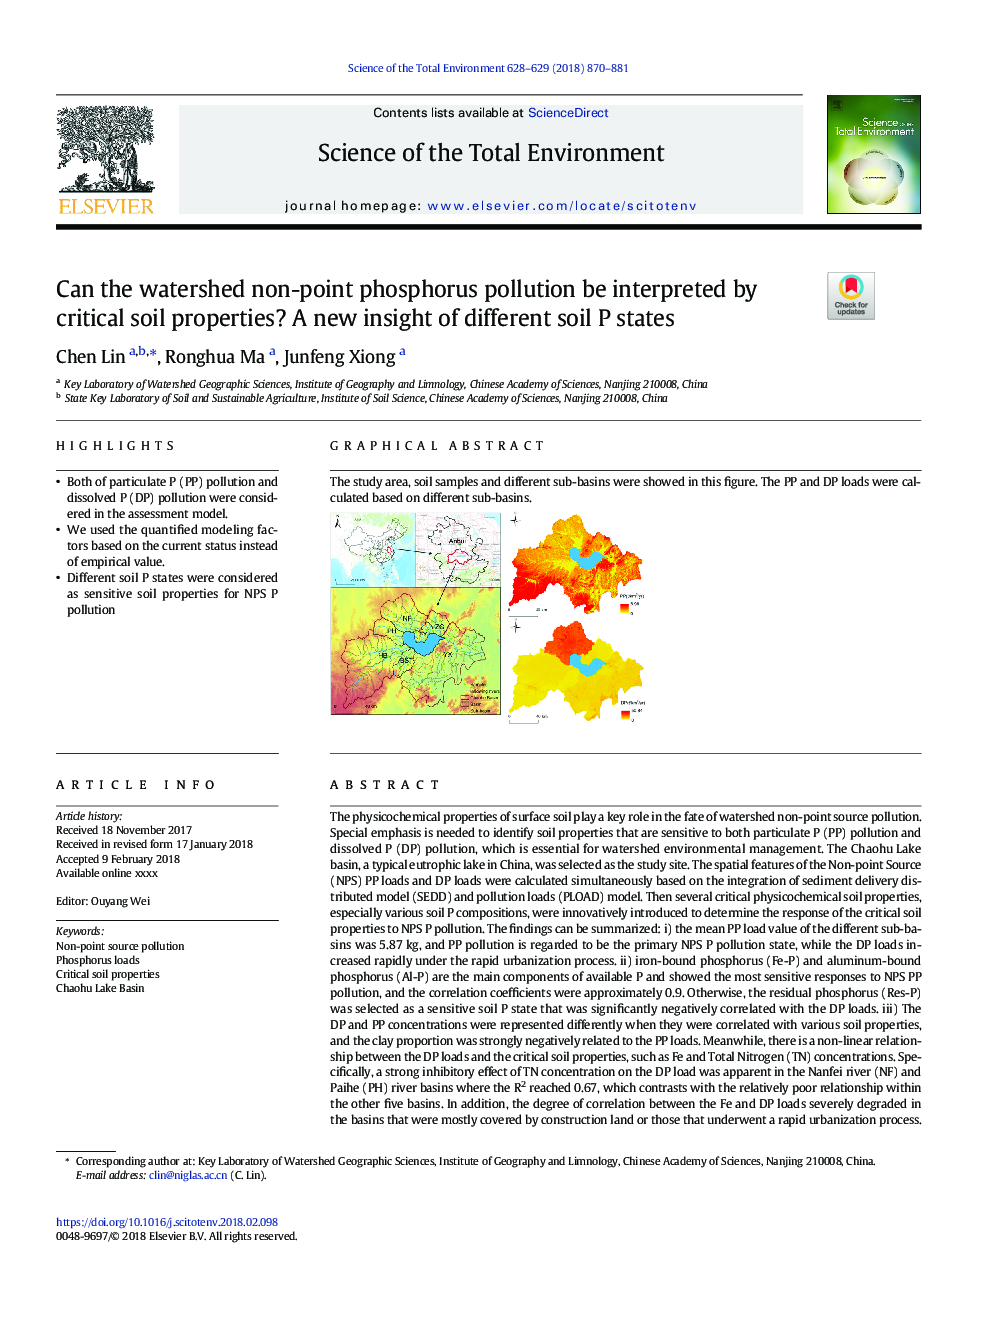 Can the watershed non-point phosphorus pollution be interpreted by critical soil properties? A new insight of different soil P states